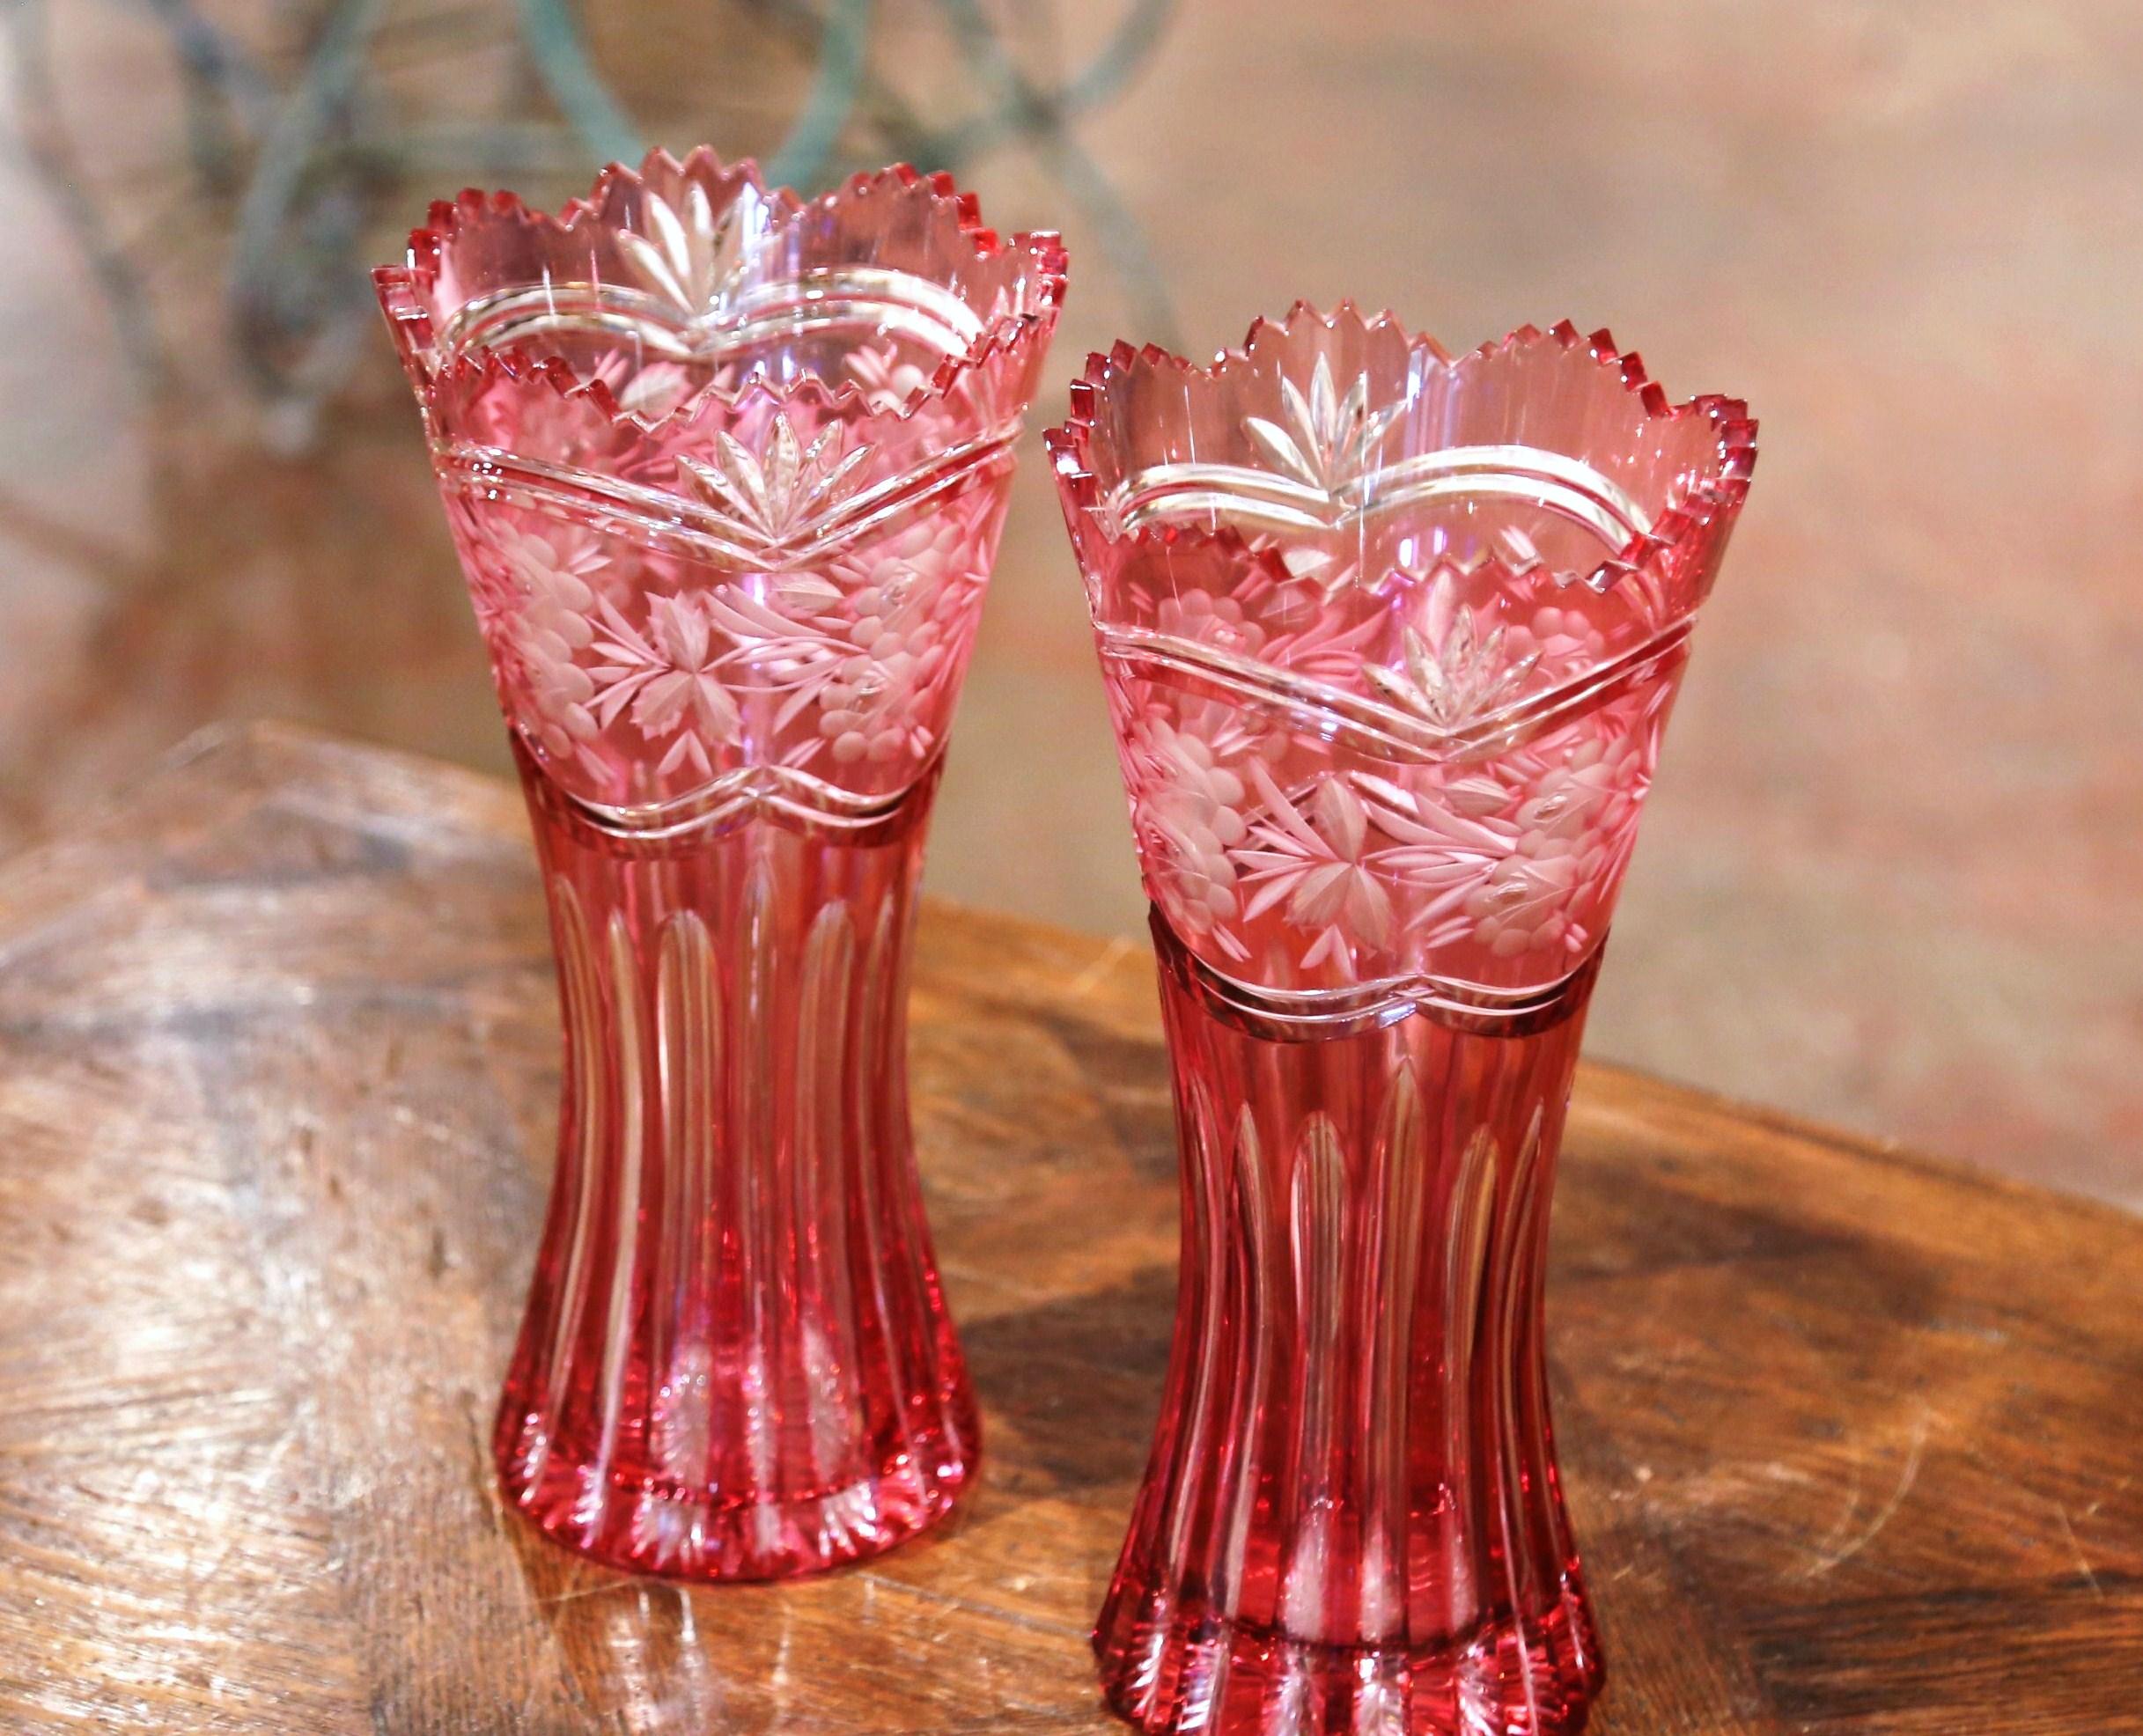 Pair of Midcentury French Cut Crystal Trumpet Vases with Frosted Floral Motifs In Excellent Condition For Sale In Dallas, TX